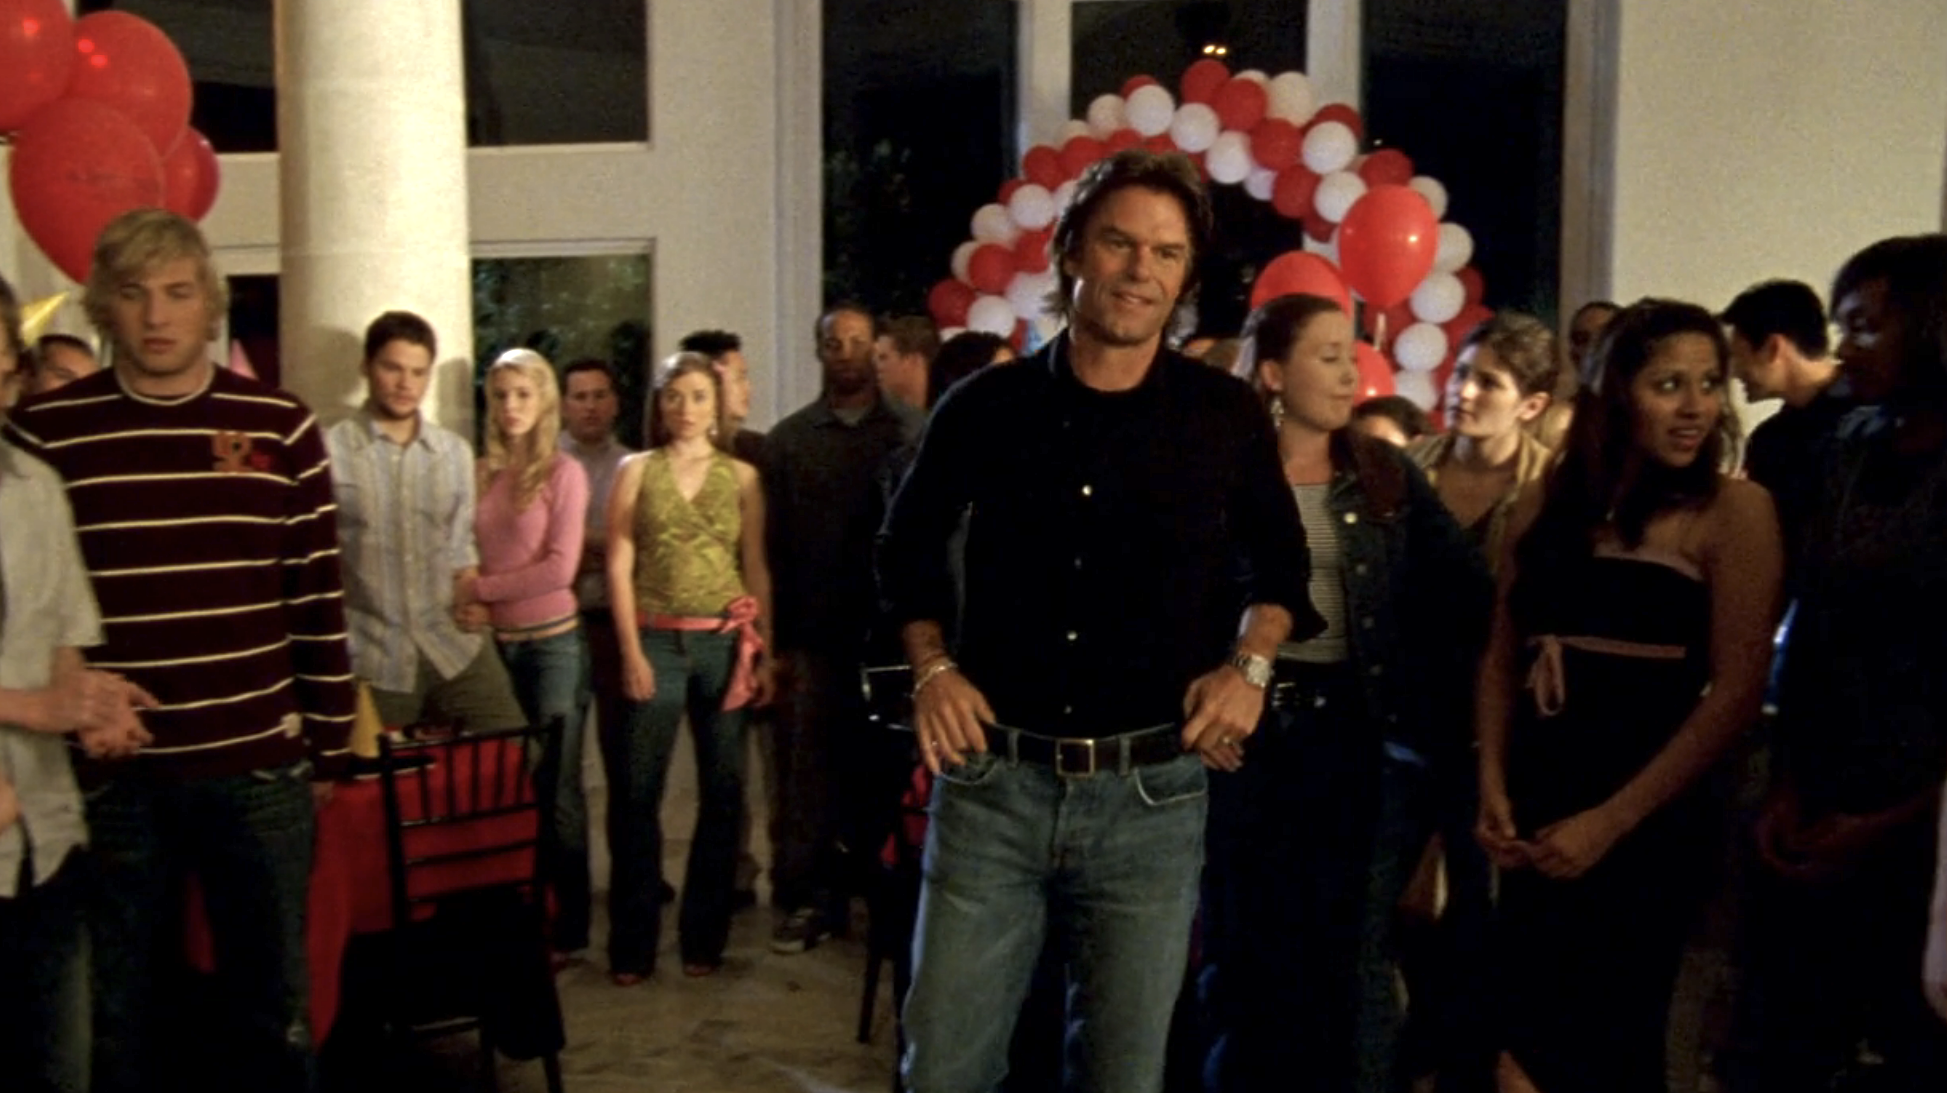 Screnshot from S1E21 of Veronica Mars. Aaron Echools is standing in his house which is crowded with Logan's friends. His hands are on his hips and he's smiling slightly.